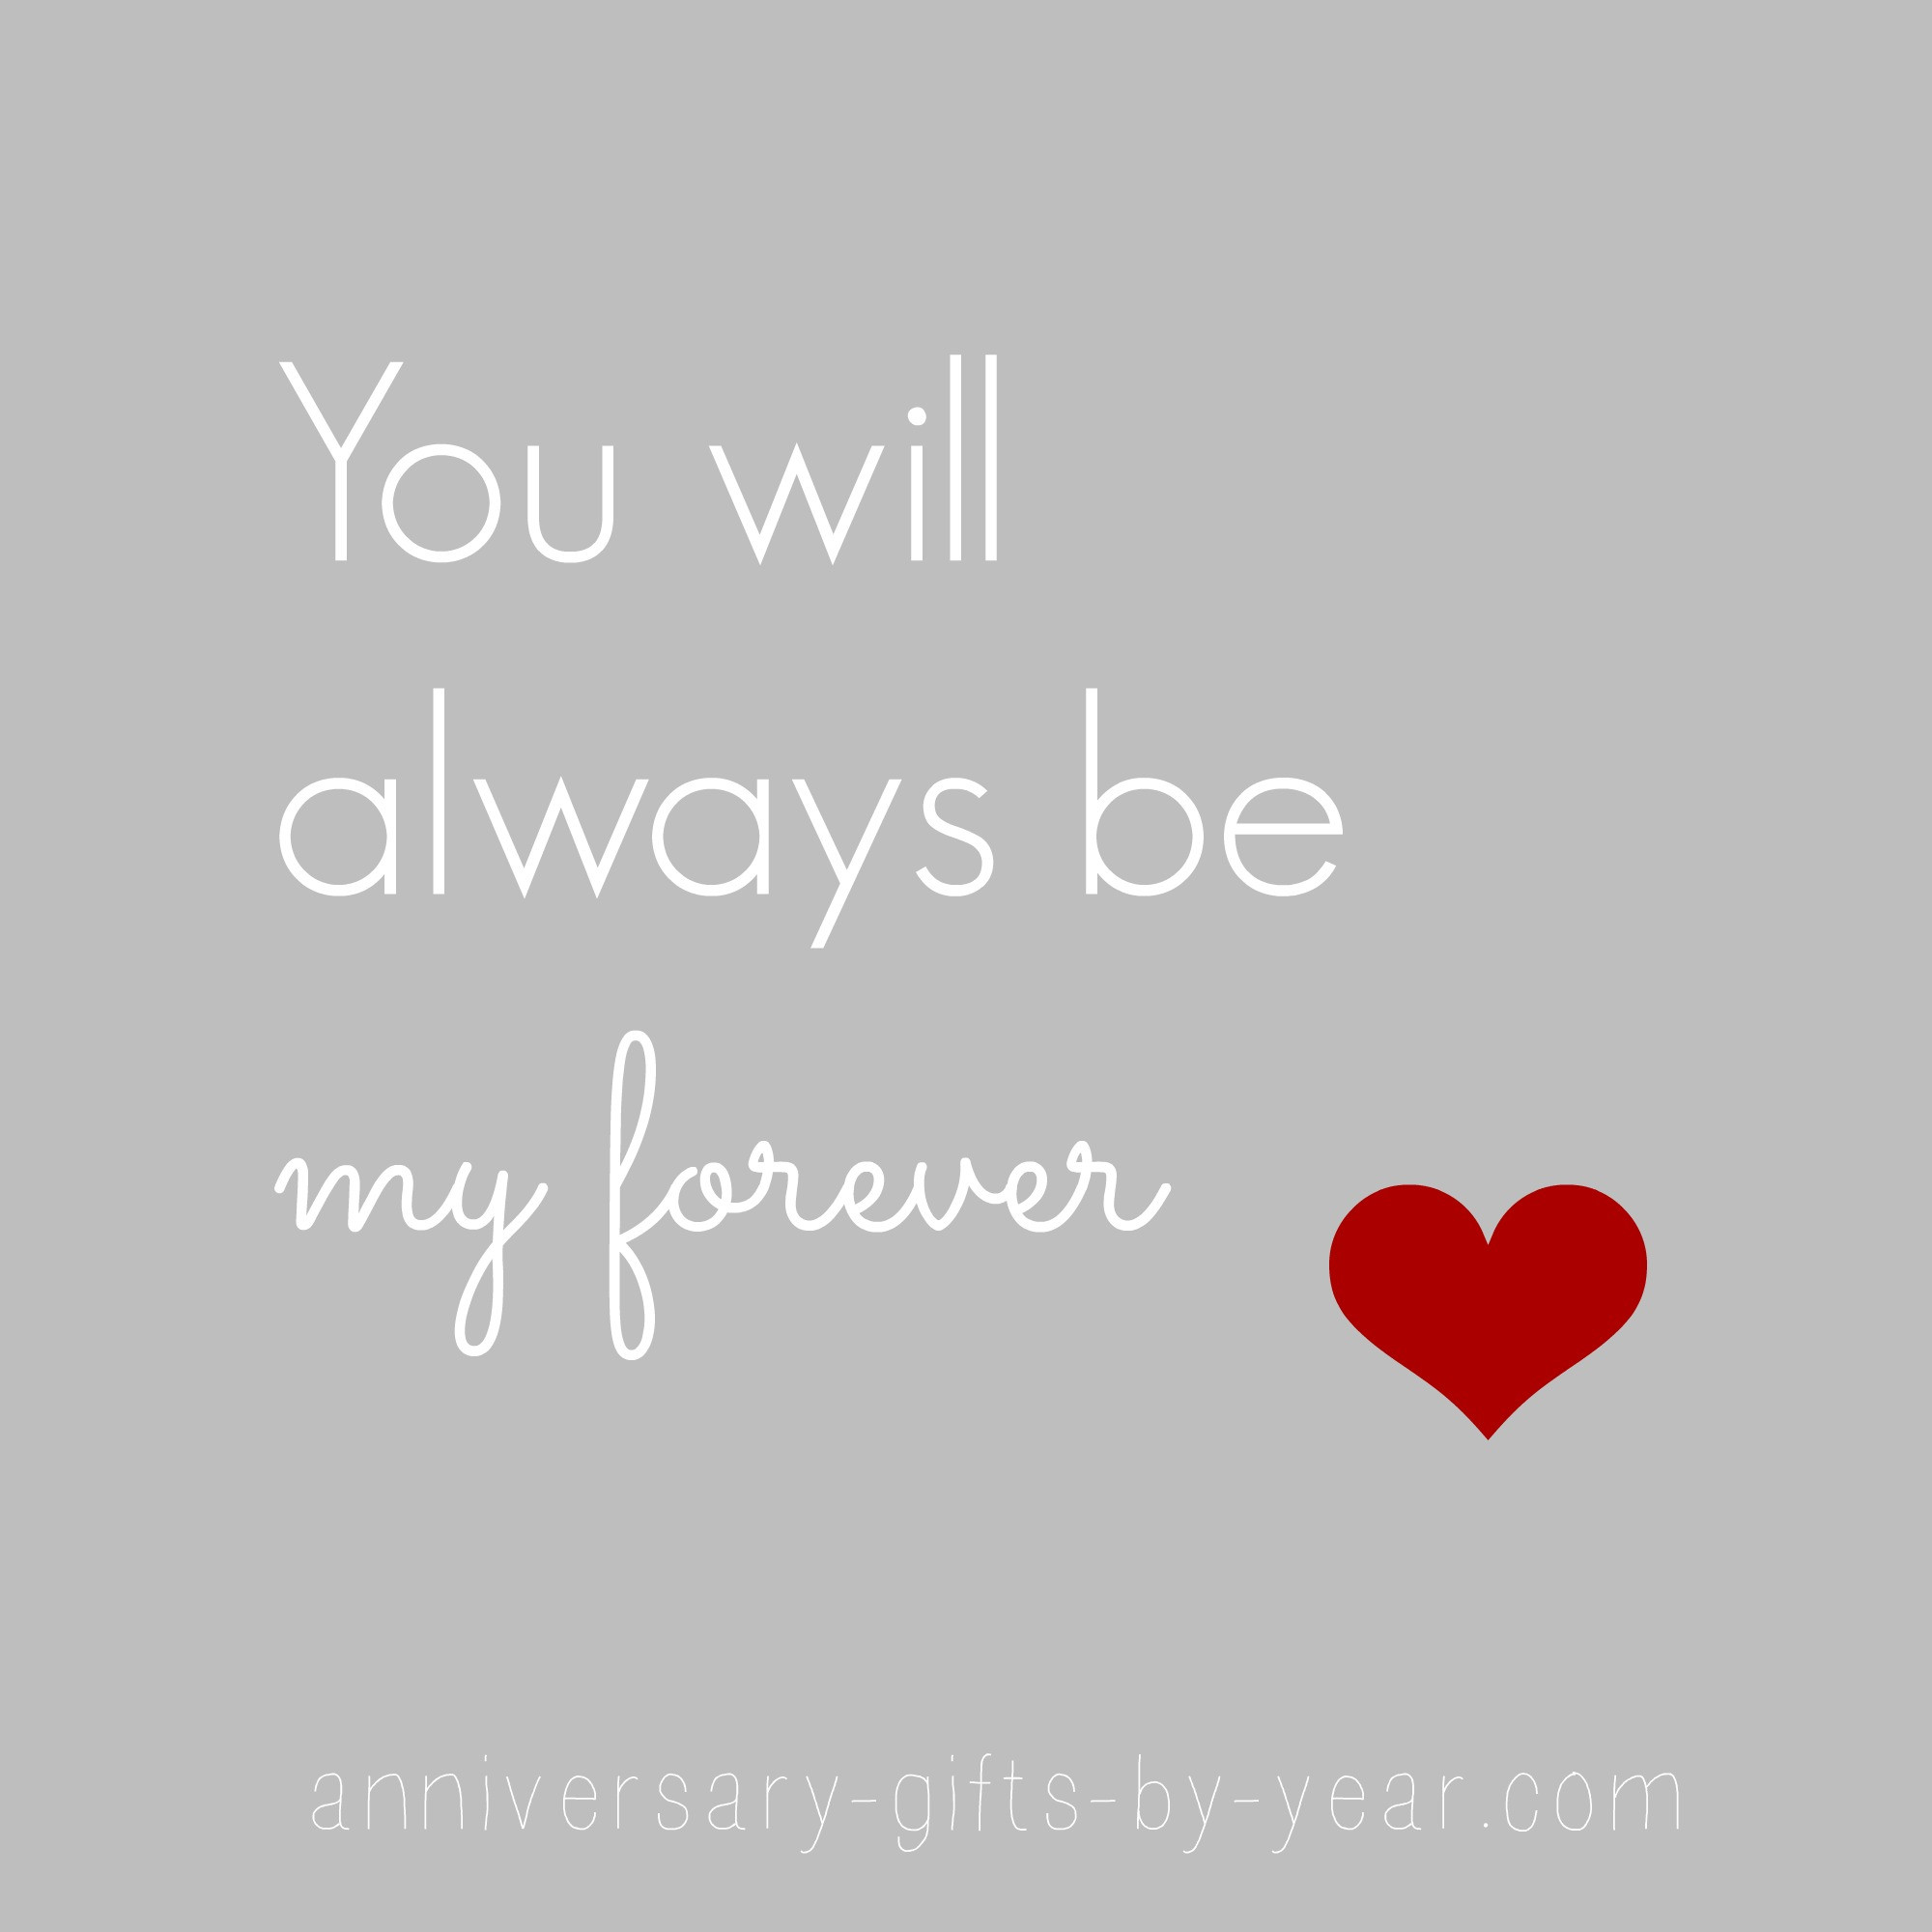 One Year Anniversary Quotes For Her
 Anniversary Quotes Perfect For Anniversary Cards and